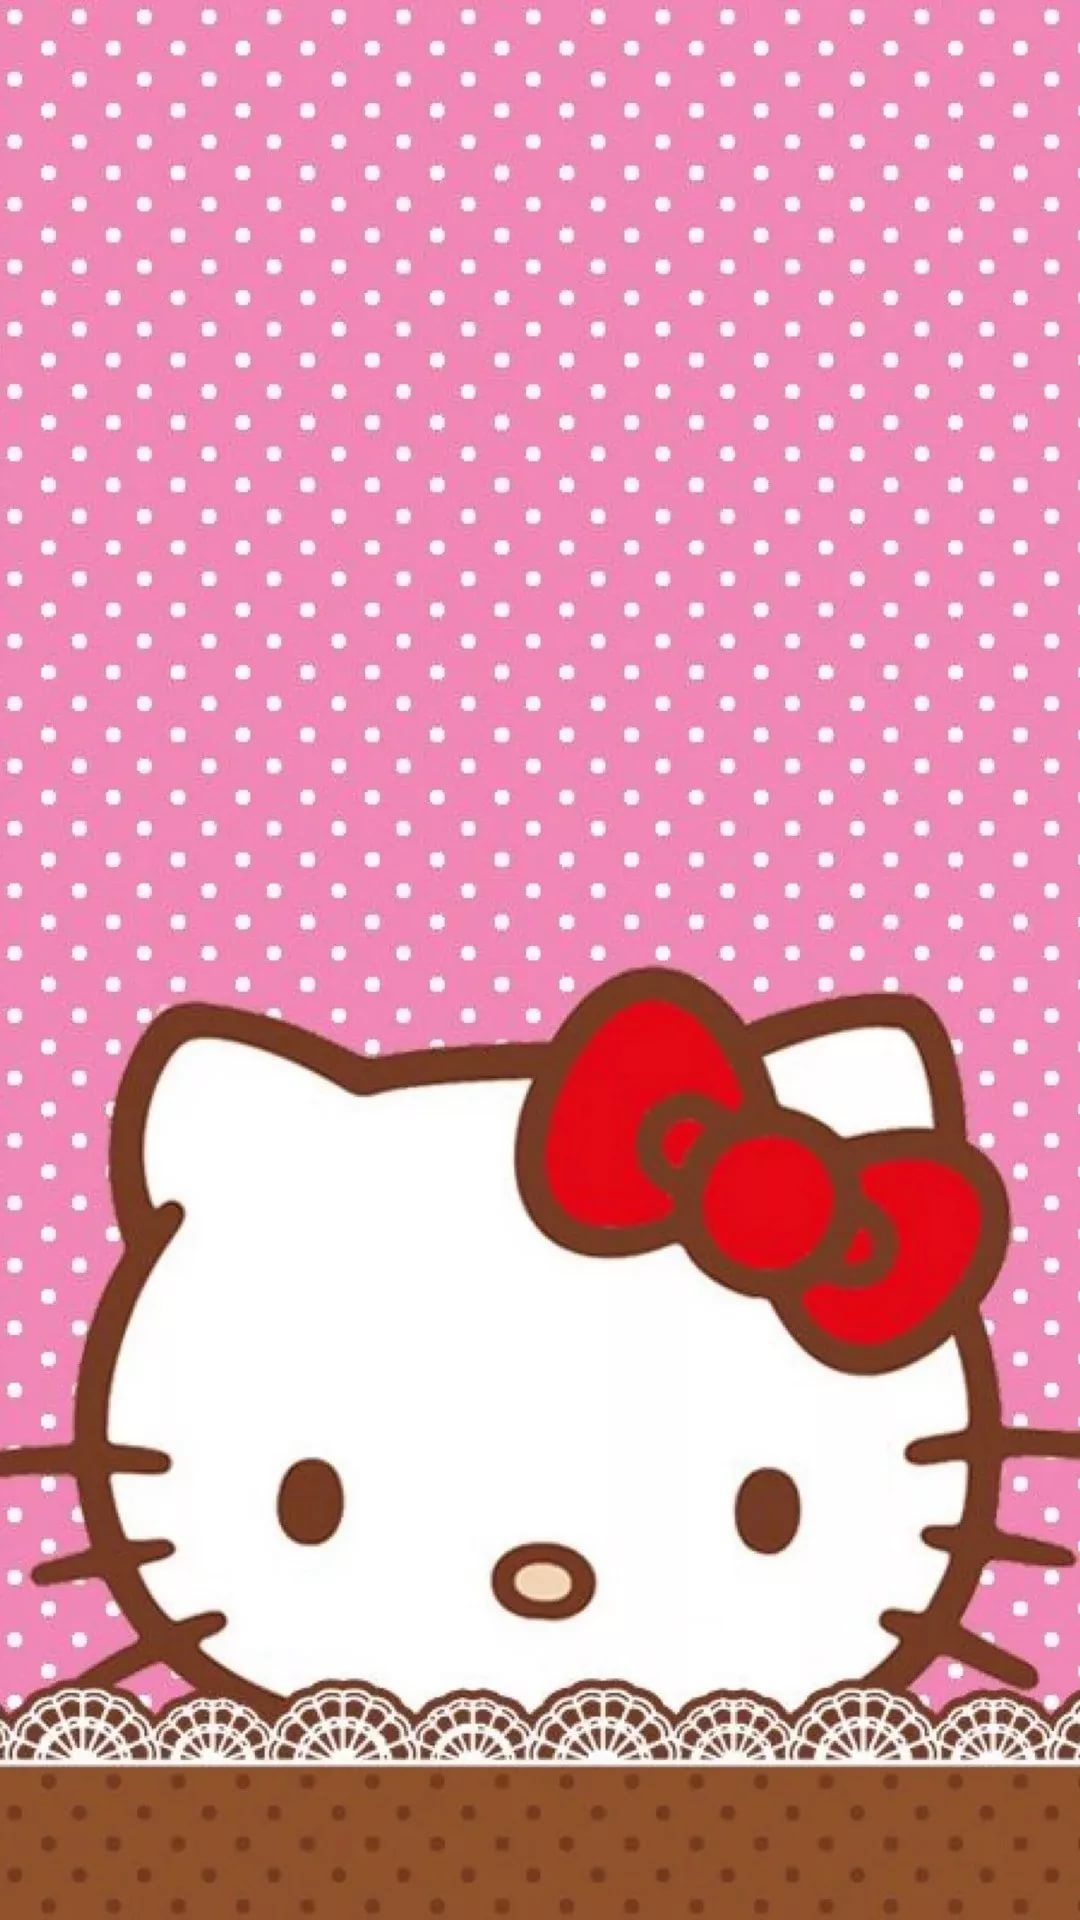 Hello Kitty Phone Wallpaper 65 images